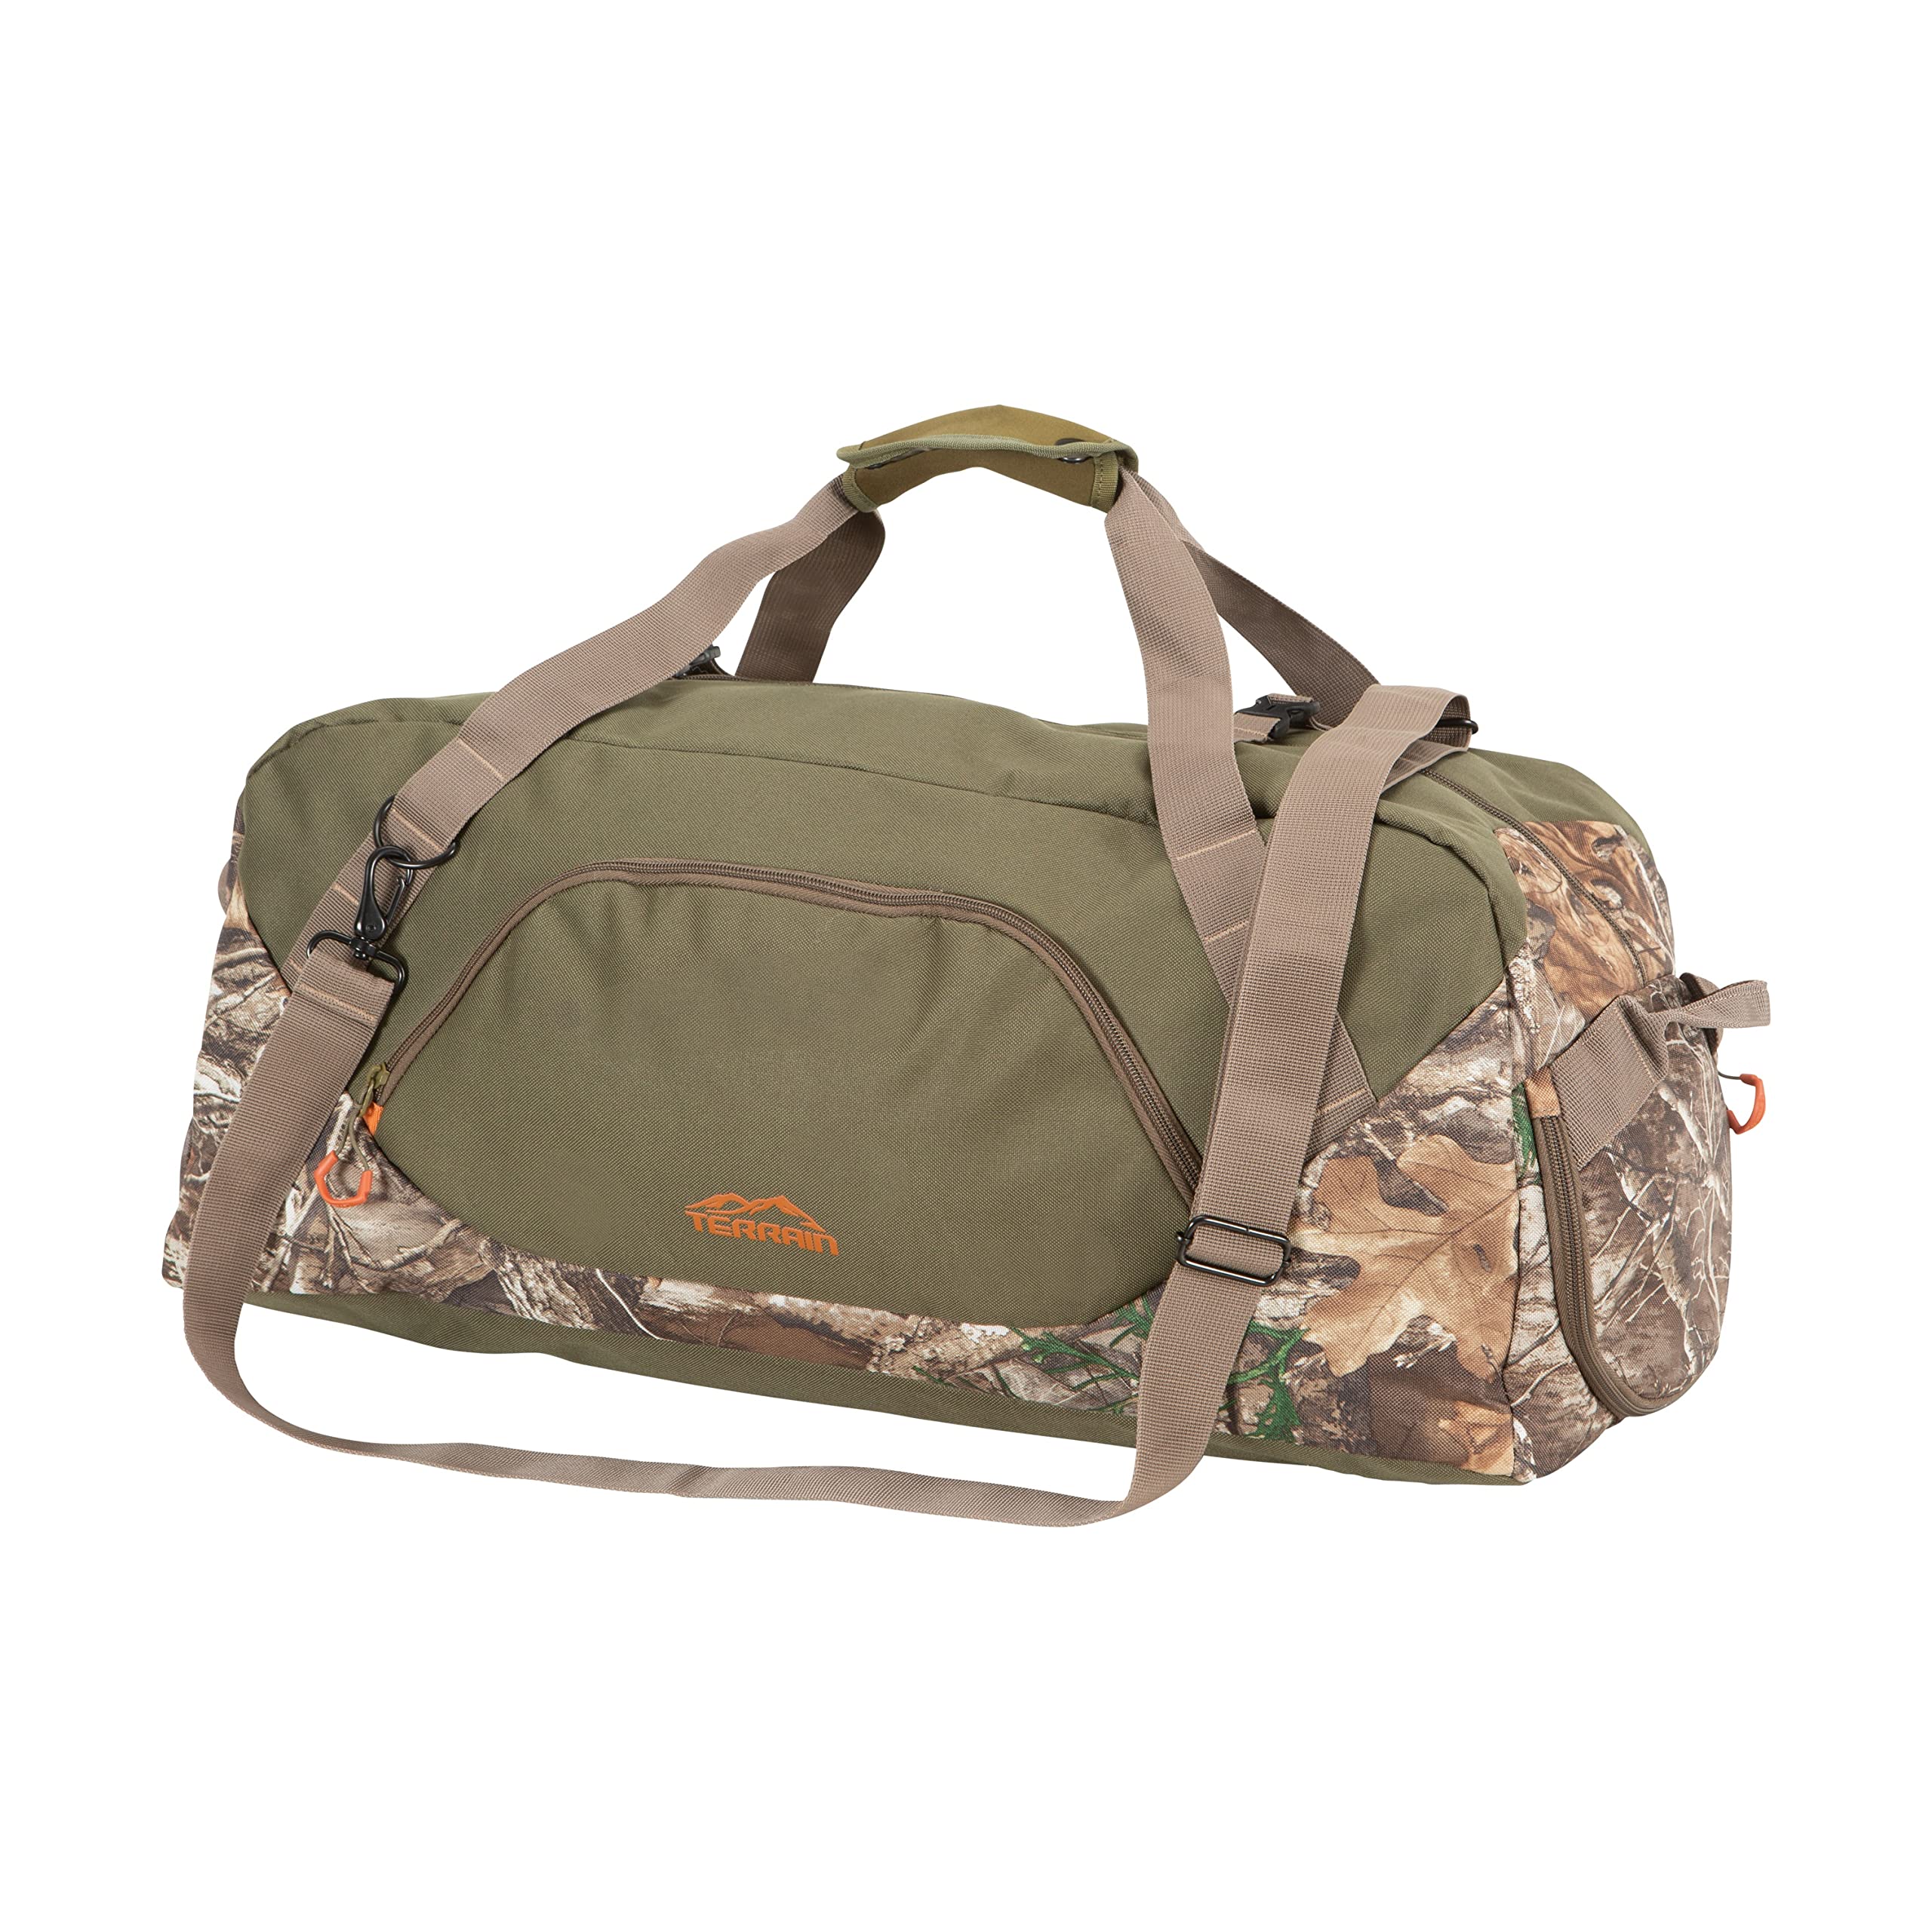 Allen Company Terrain Basin Hunting Duffel Bag in Realtree Edge Green with Pouch